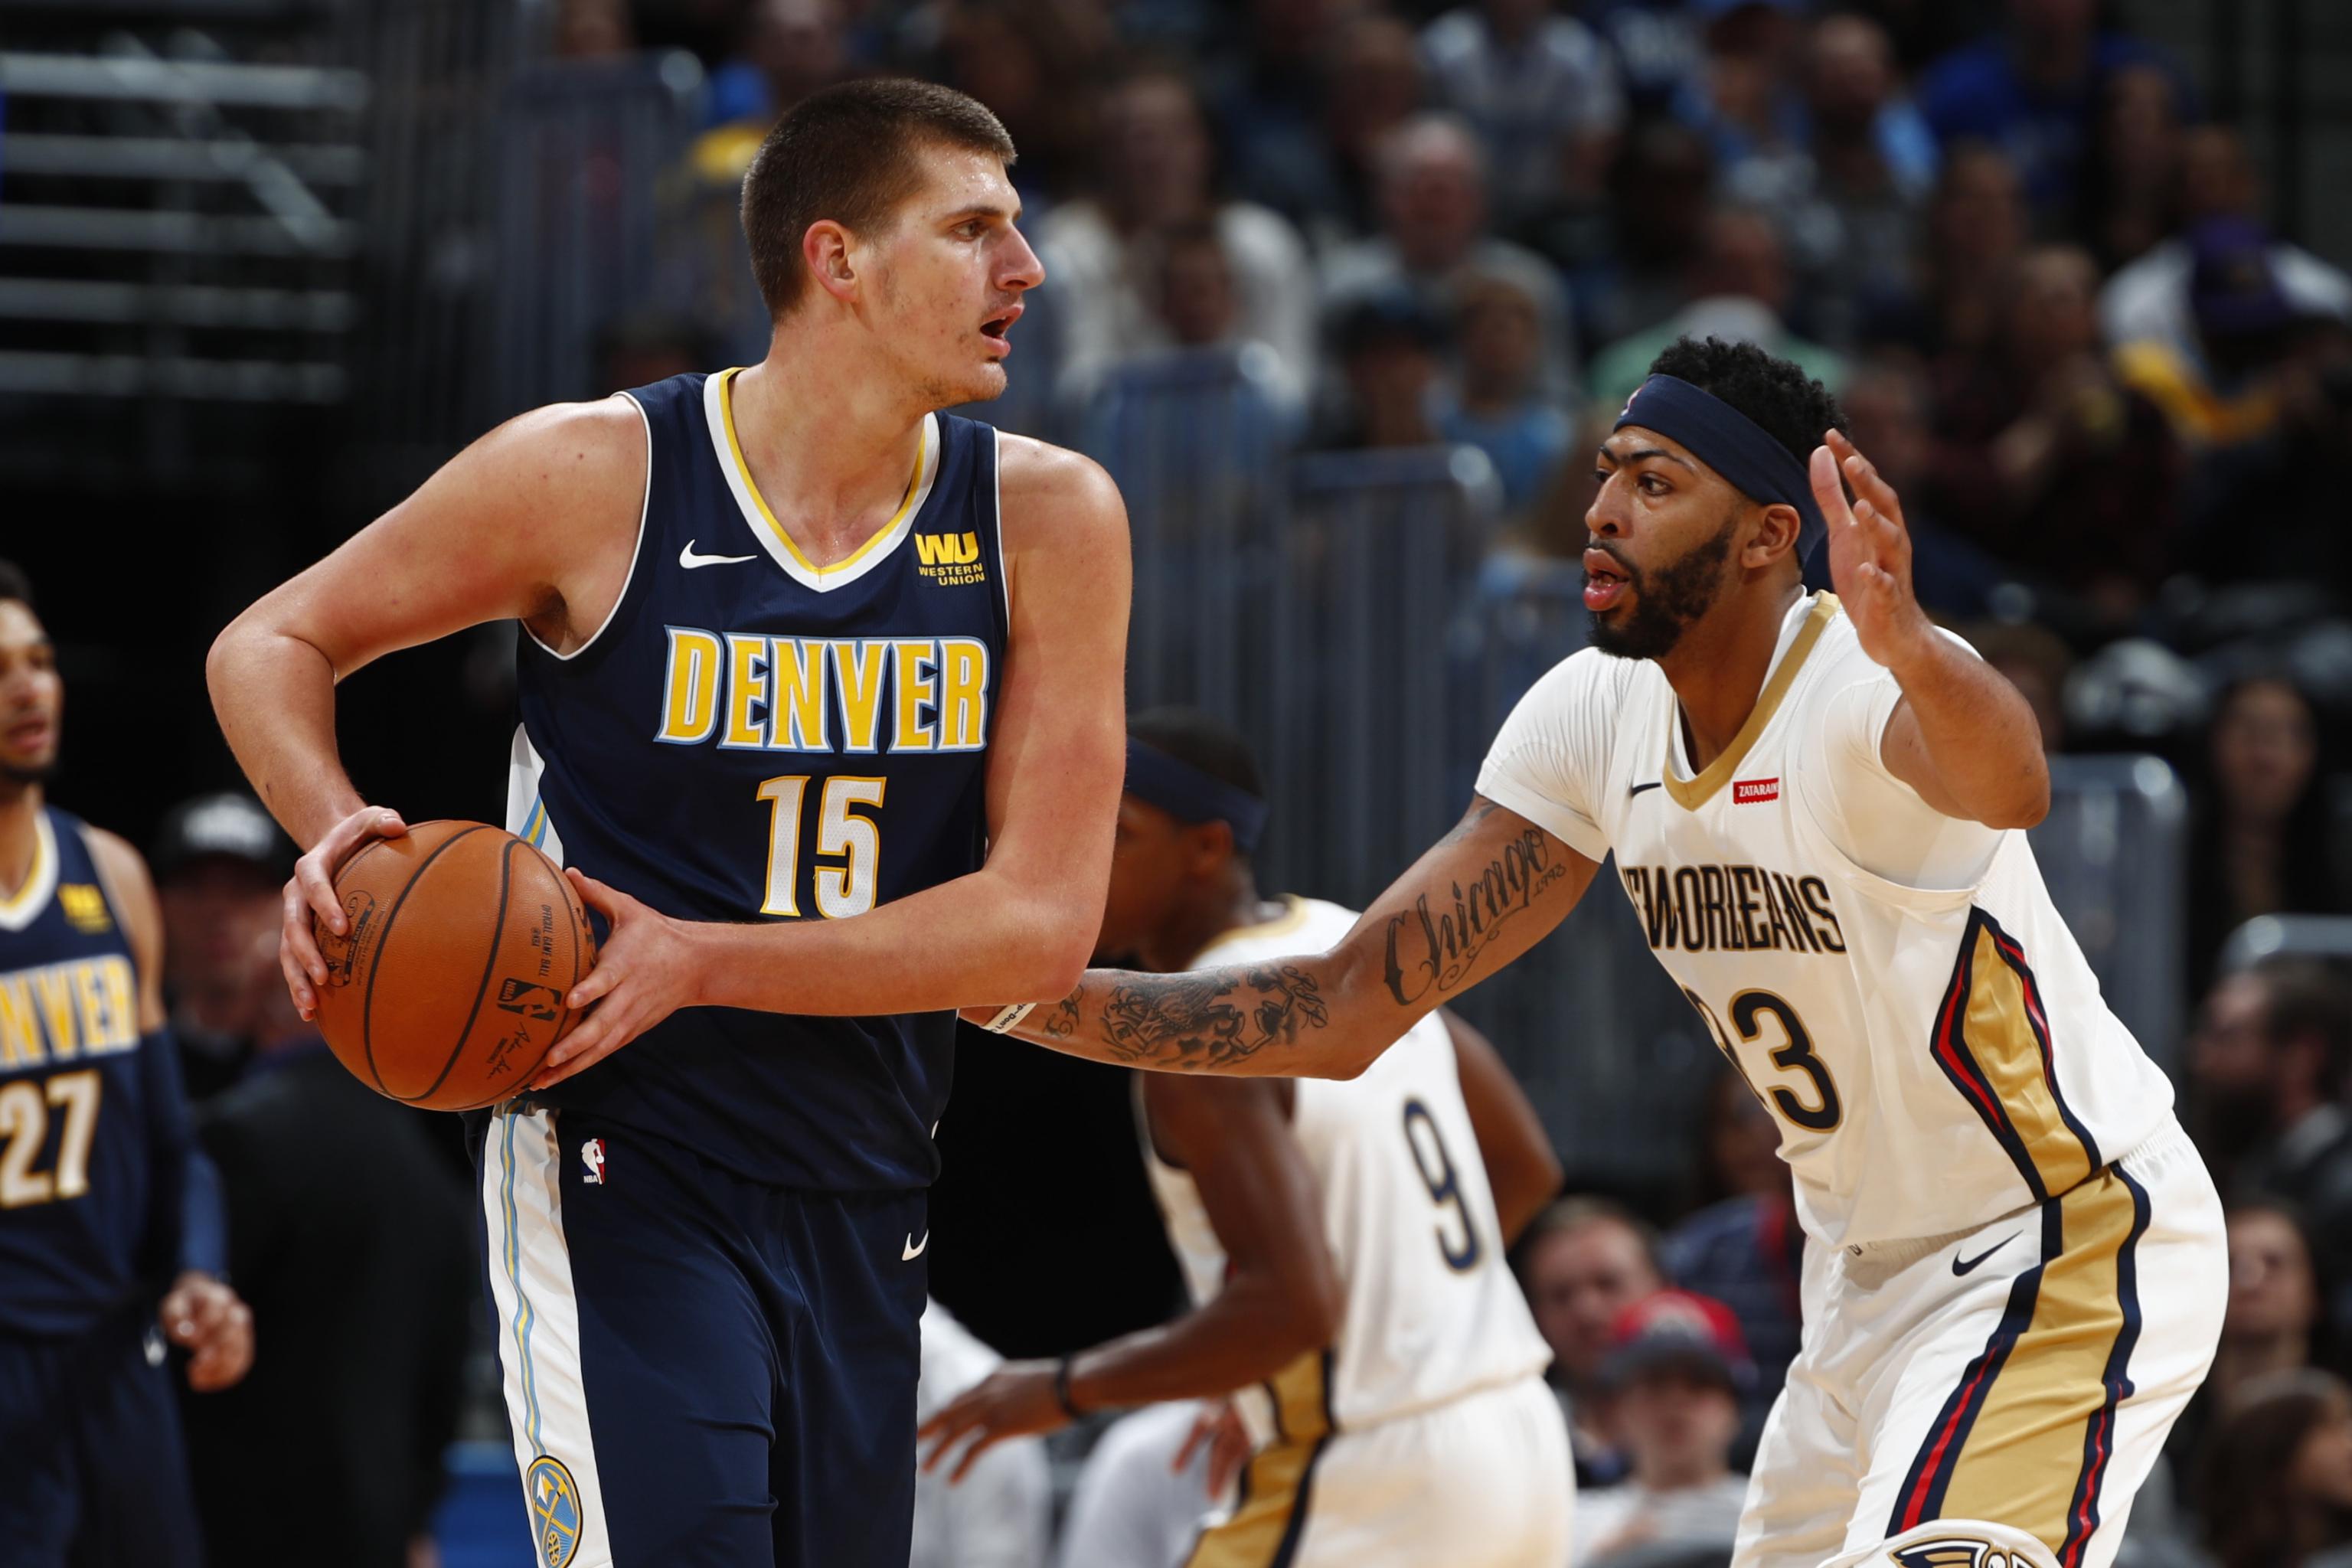 NBA All-Star 2019: 51 best reserve candidates, ranked 